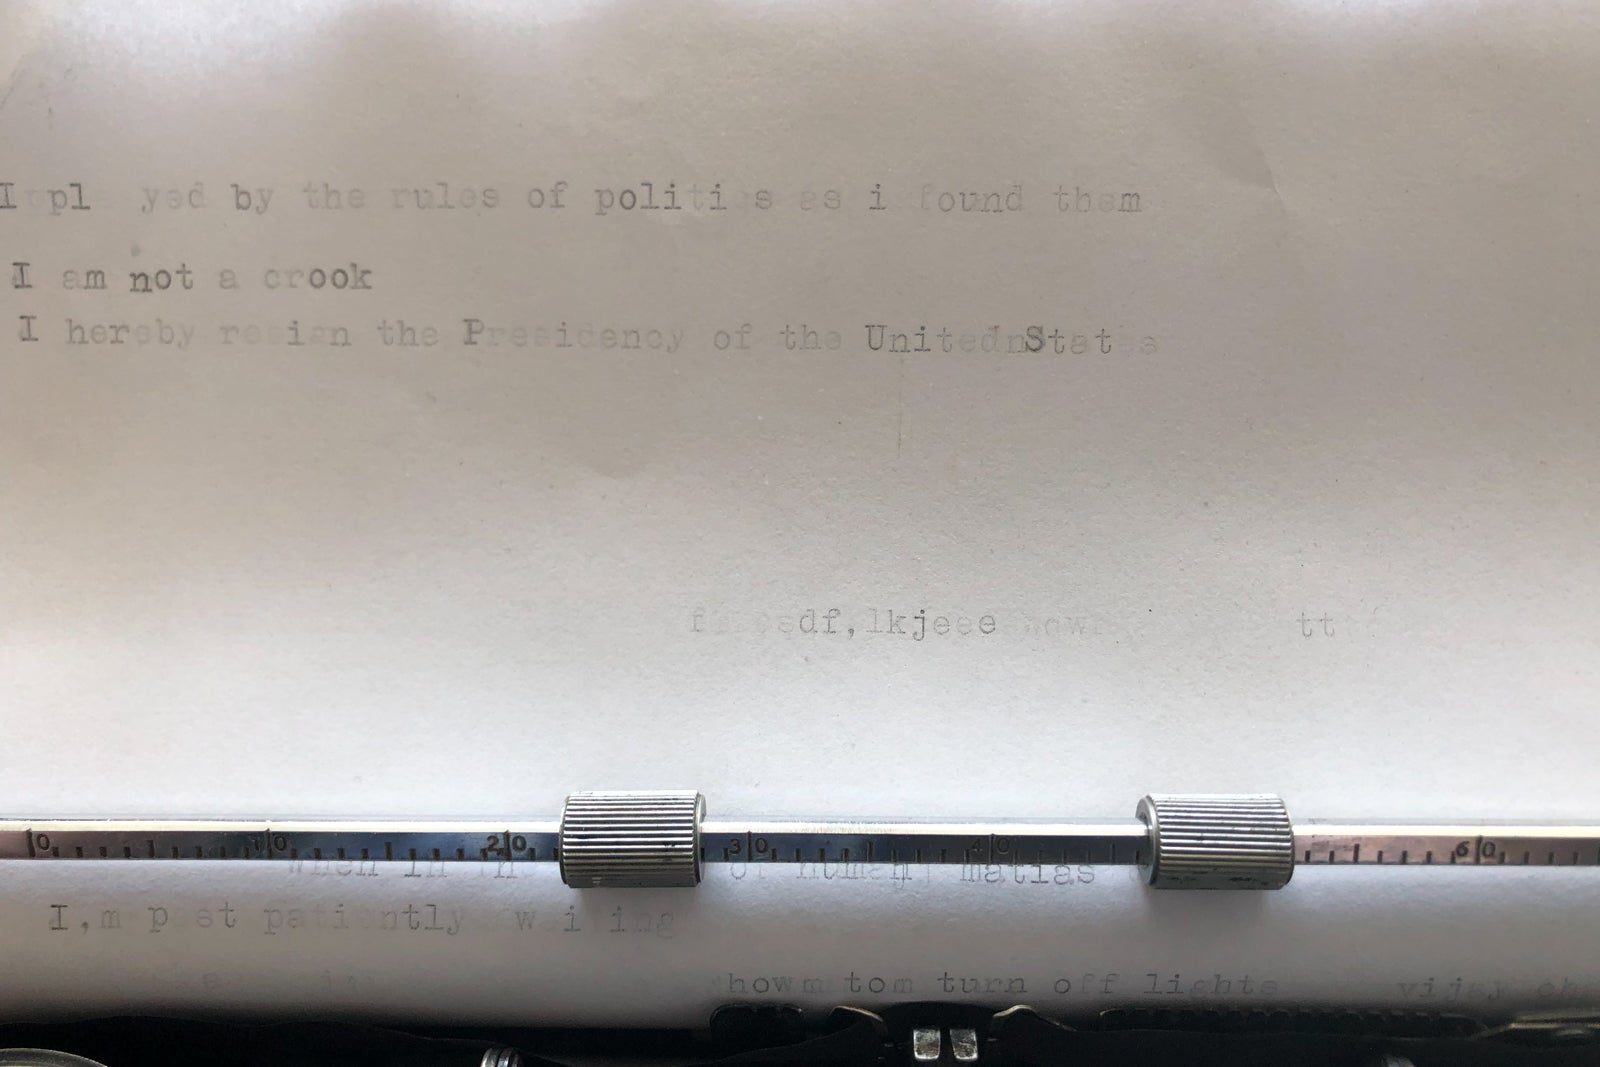 When you take a closer look at the Scandal Room's typewriter, you'll notice a number of famous Nixon quotes printed in faded ink.